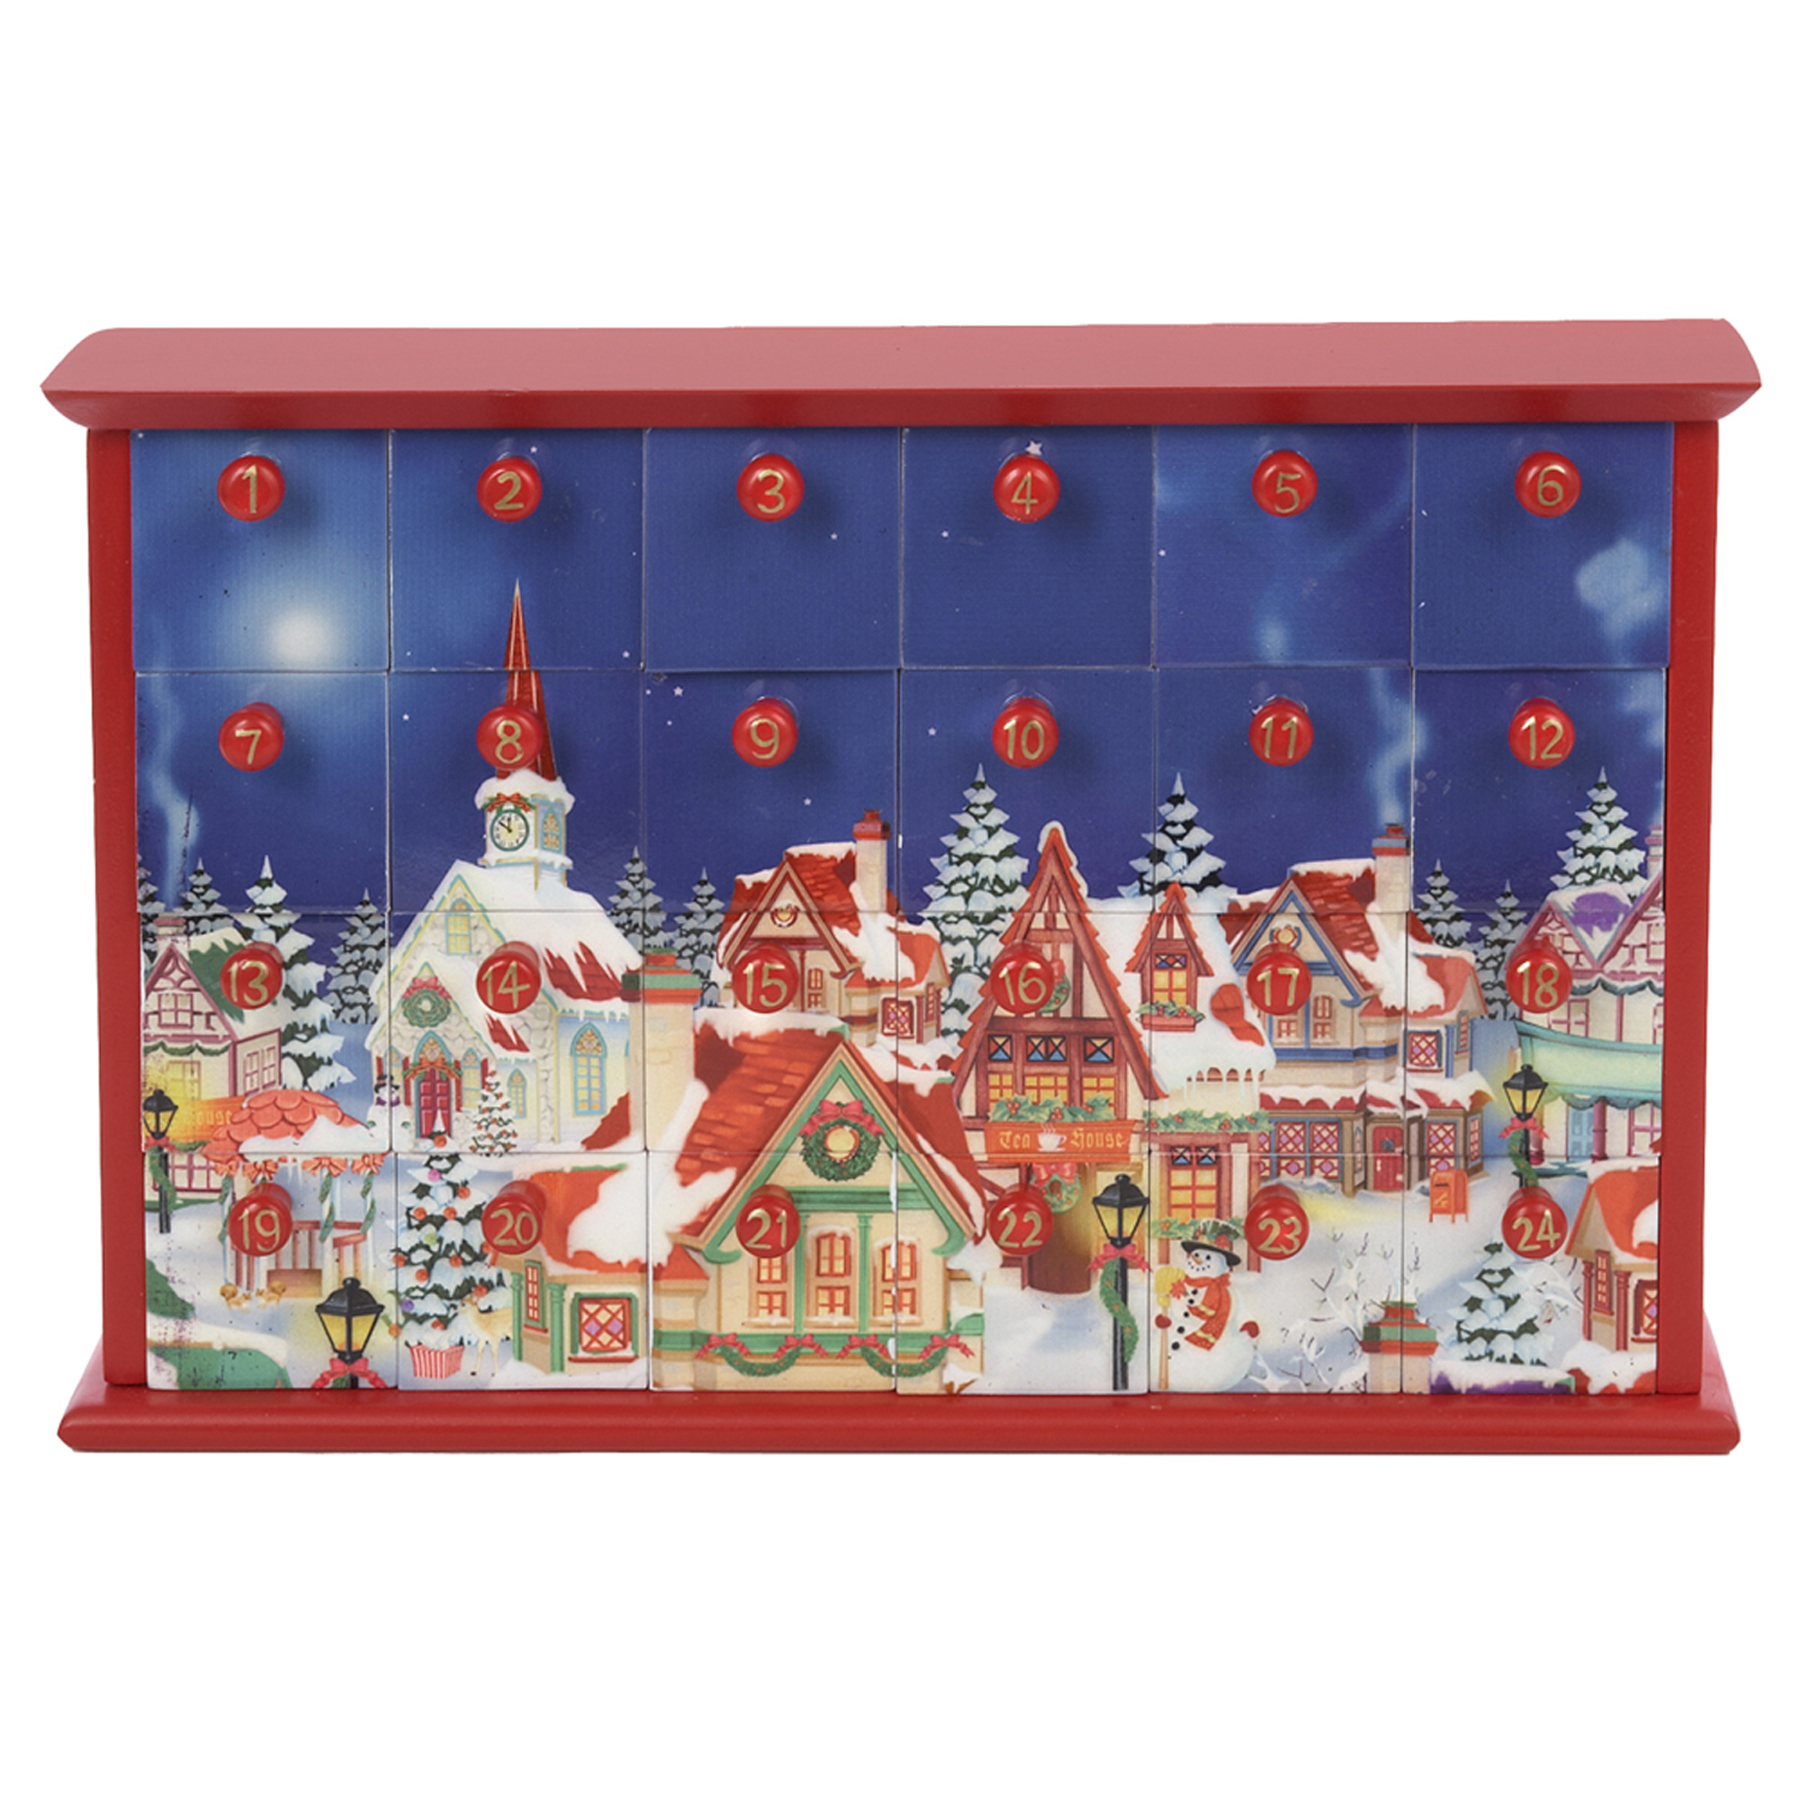 12.4" Advent Calendar with 24 Empty Drawers